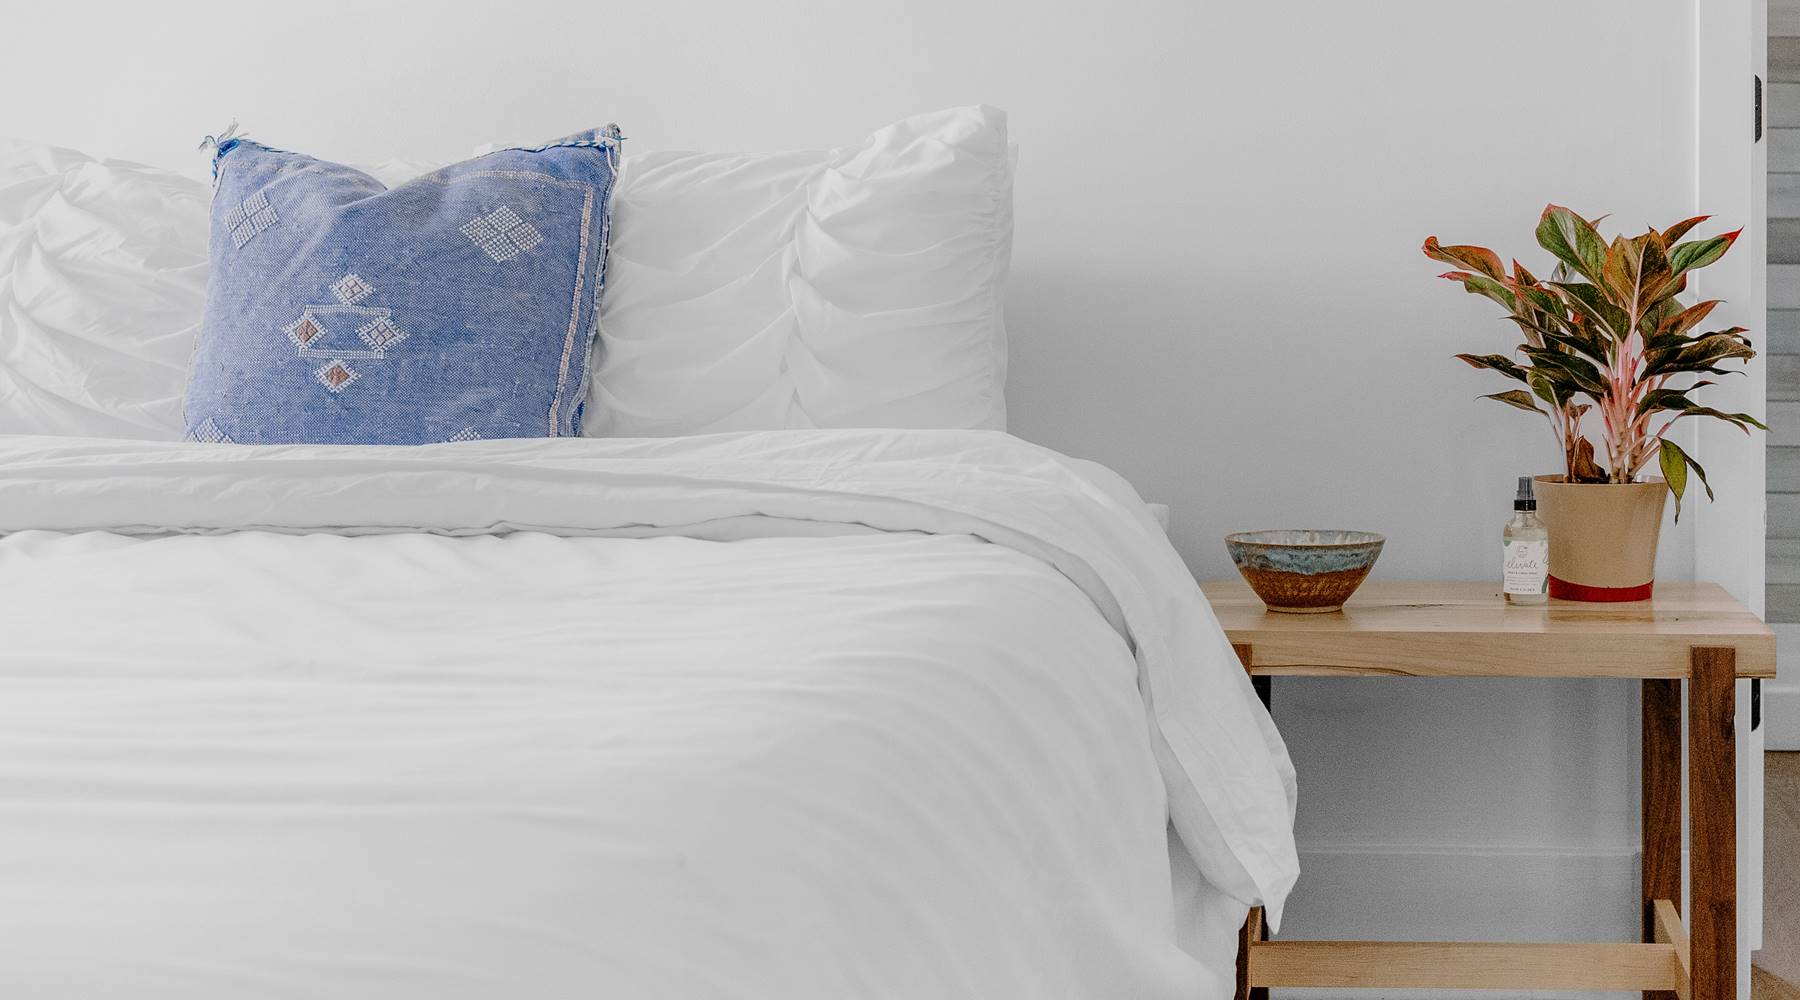 Mattress with white bedding and blue pillow. Nightstand with plant and spray bottle.